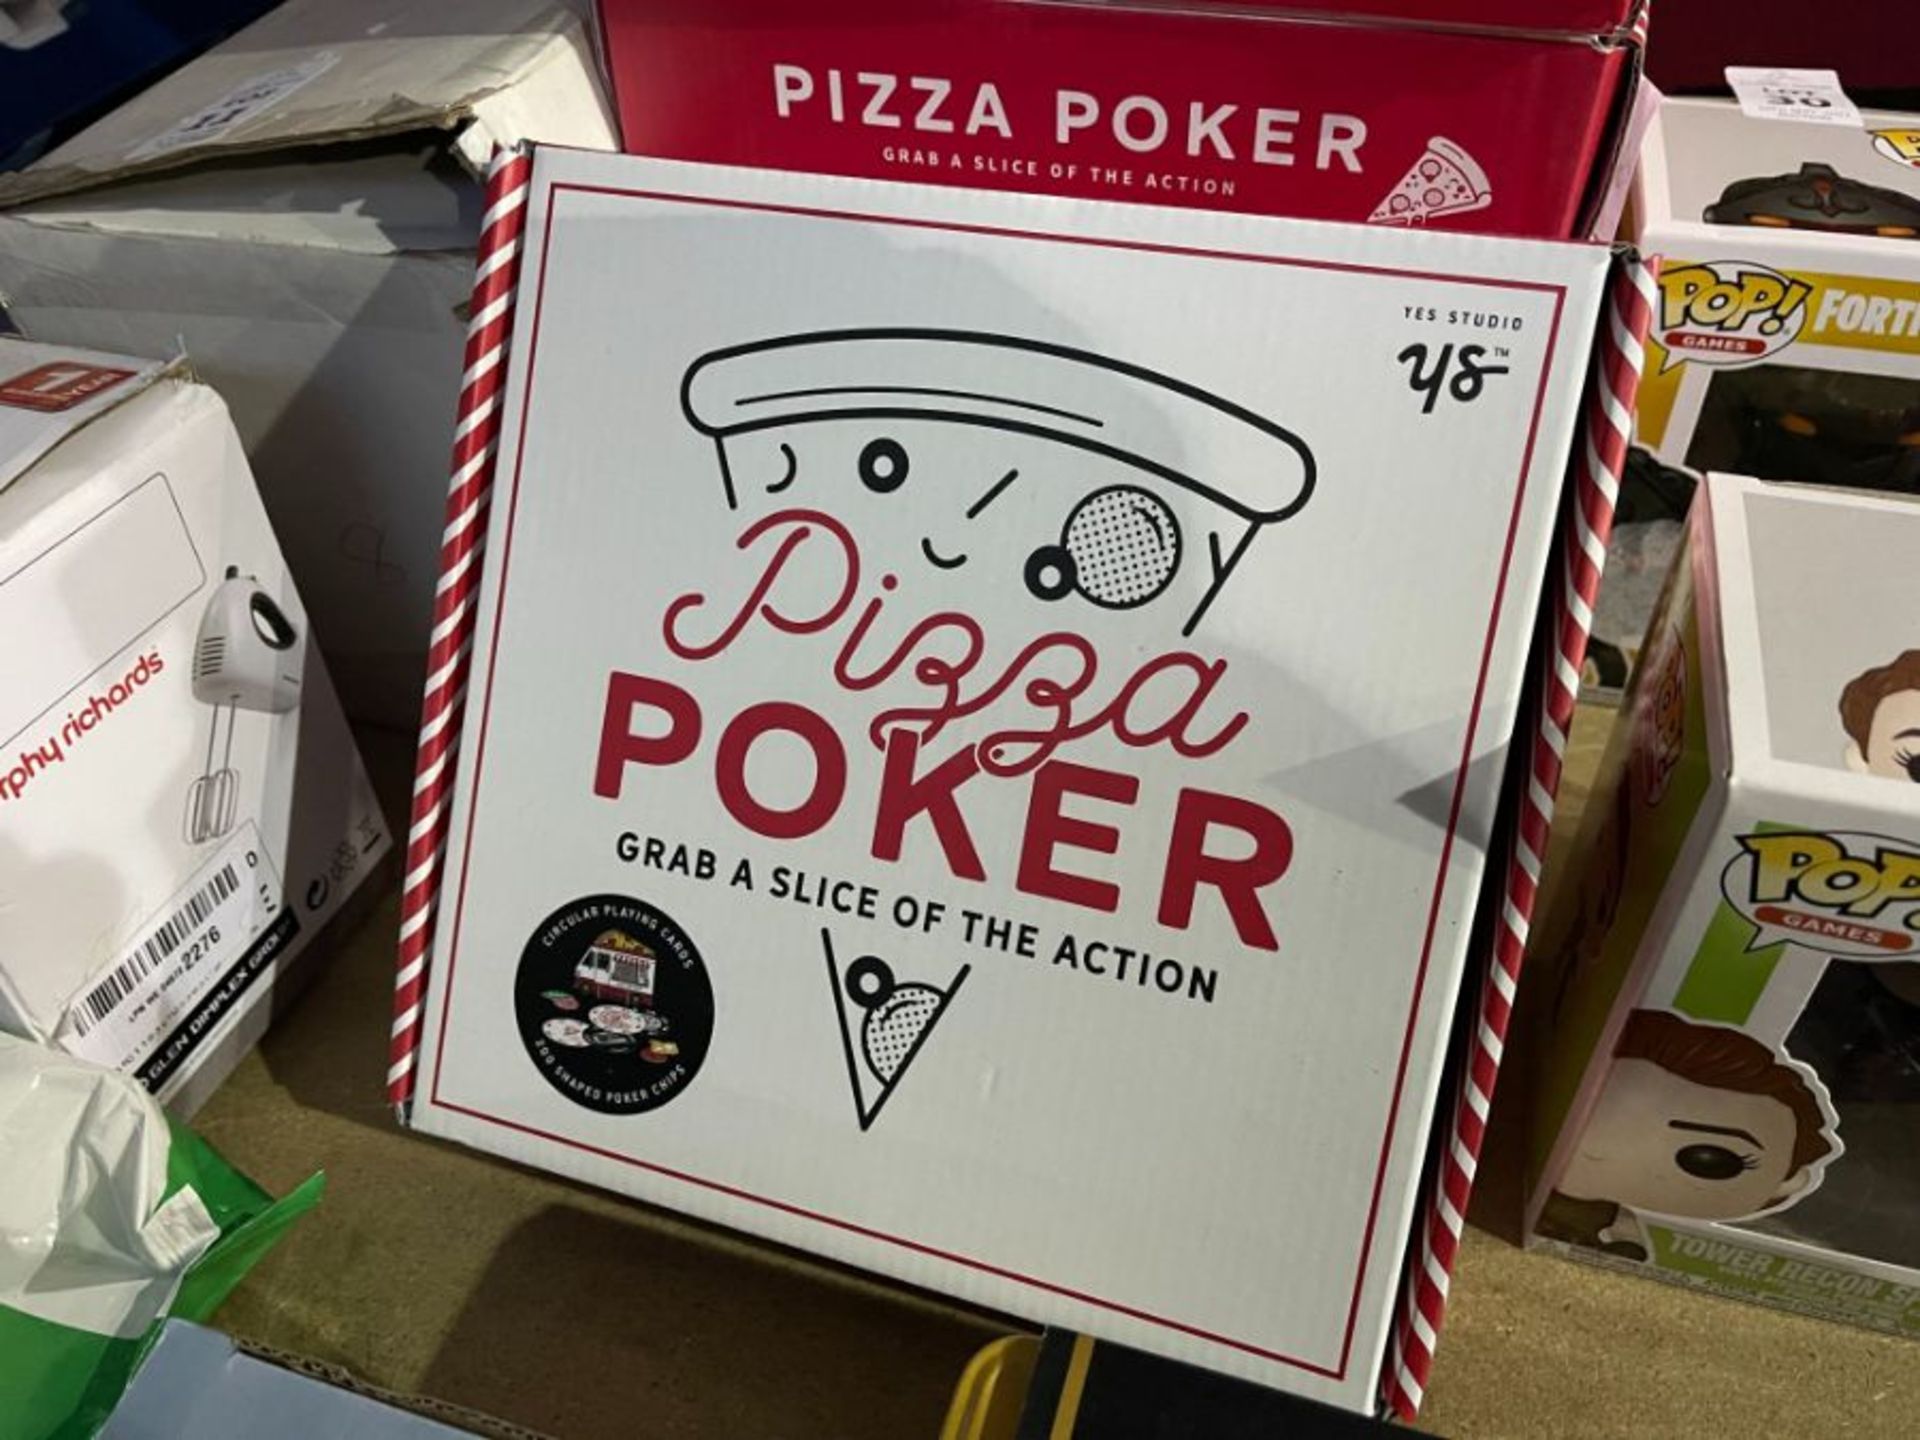 YES STUDIO PIZZA POKER BOARD GAME RRP £20 (SEALED)